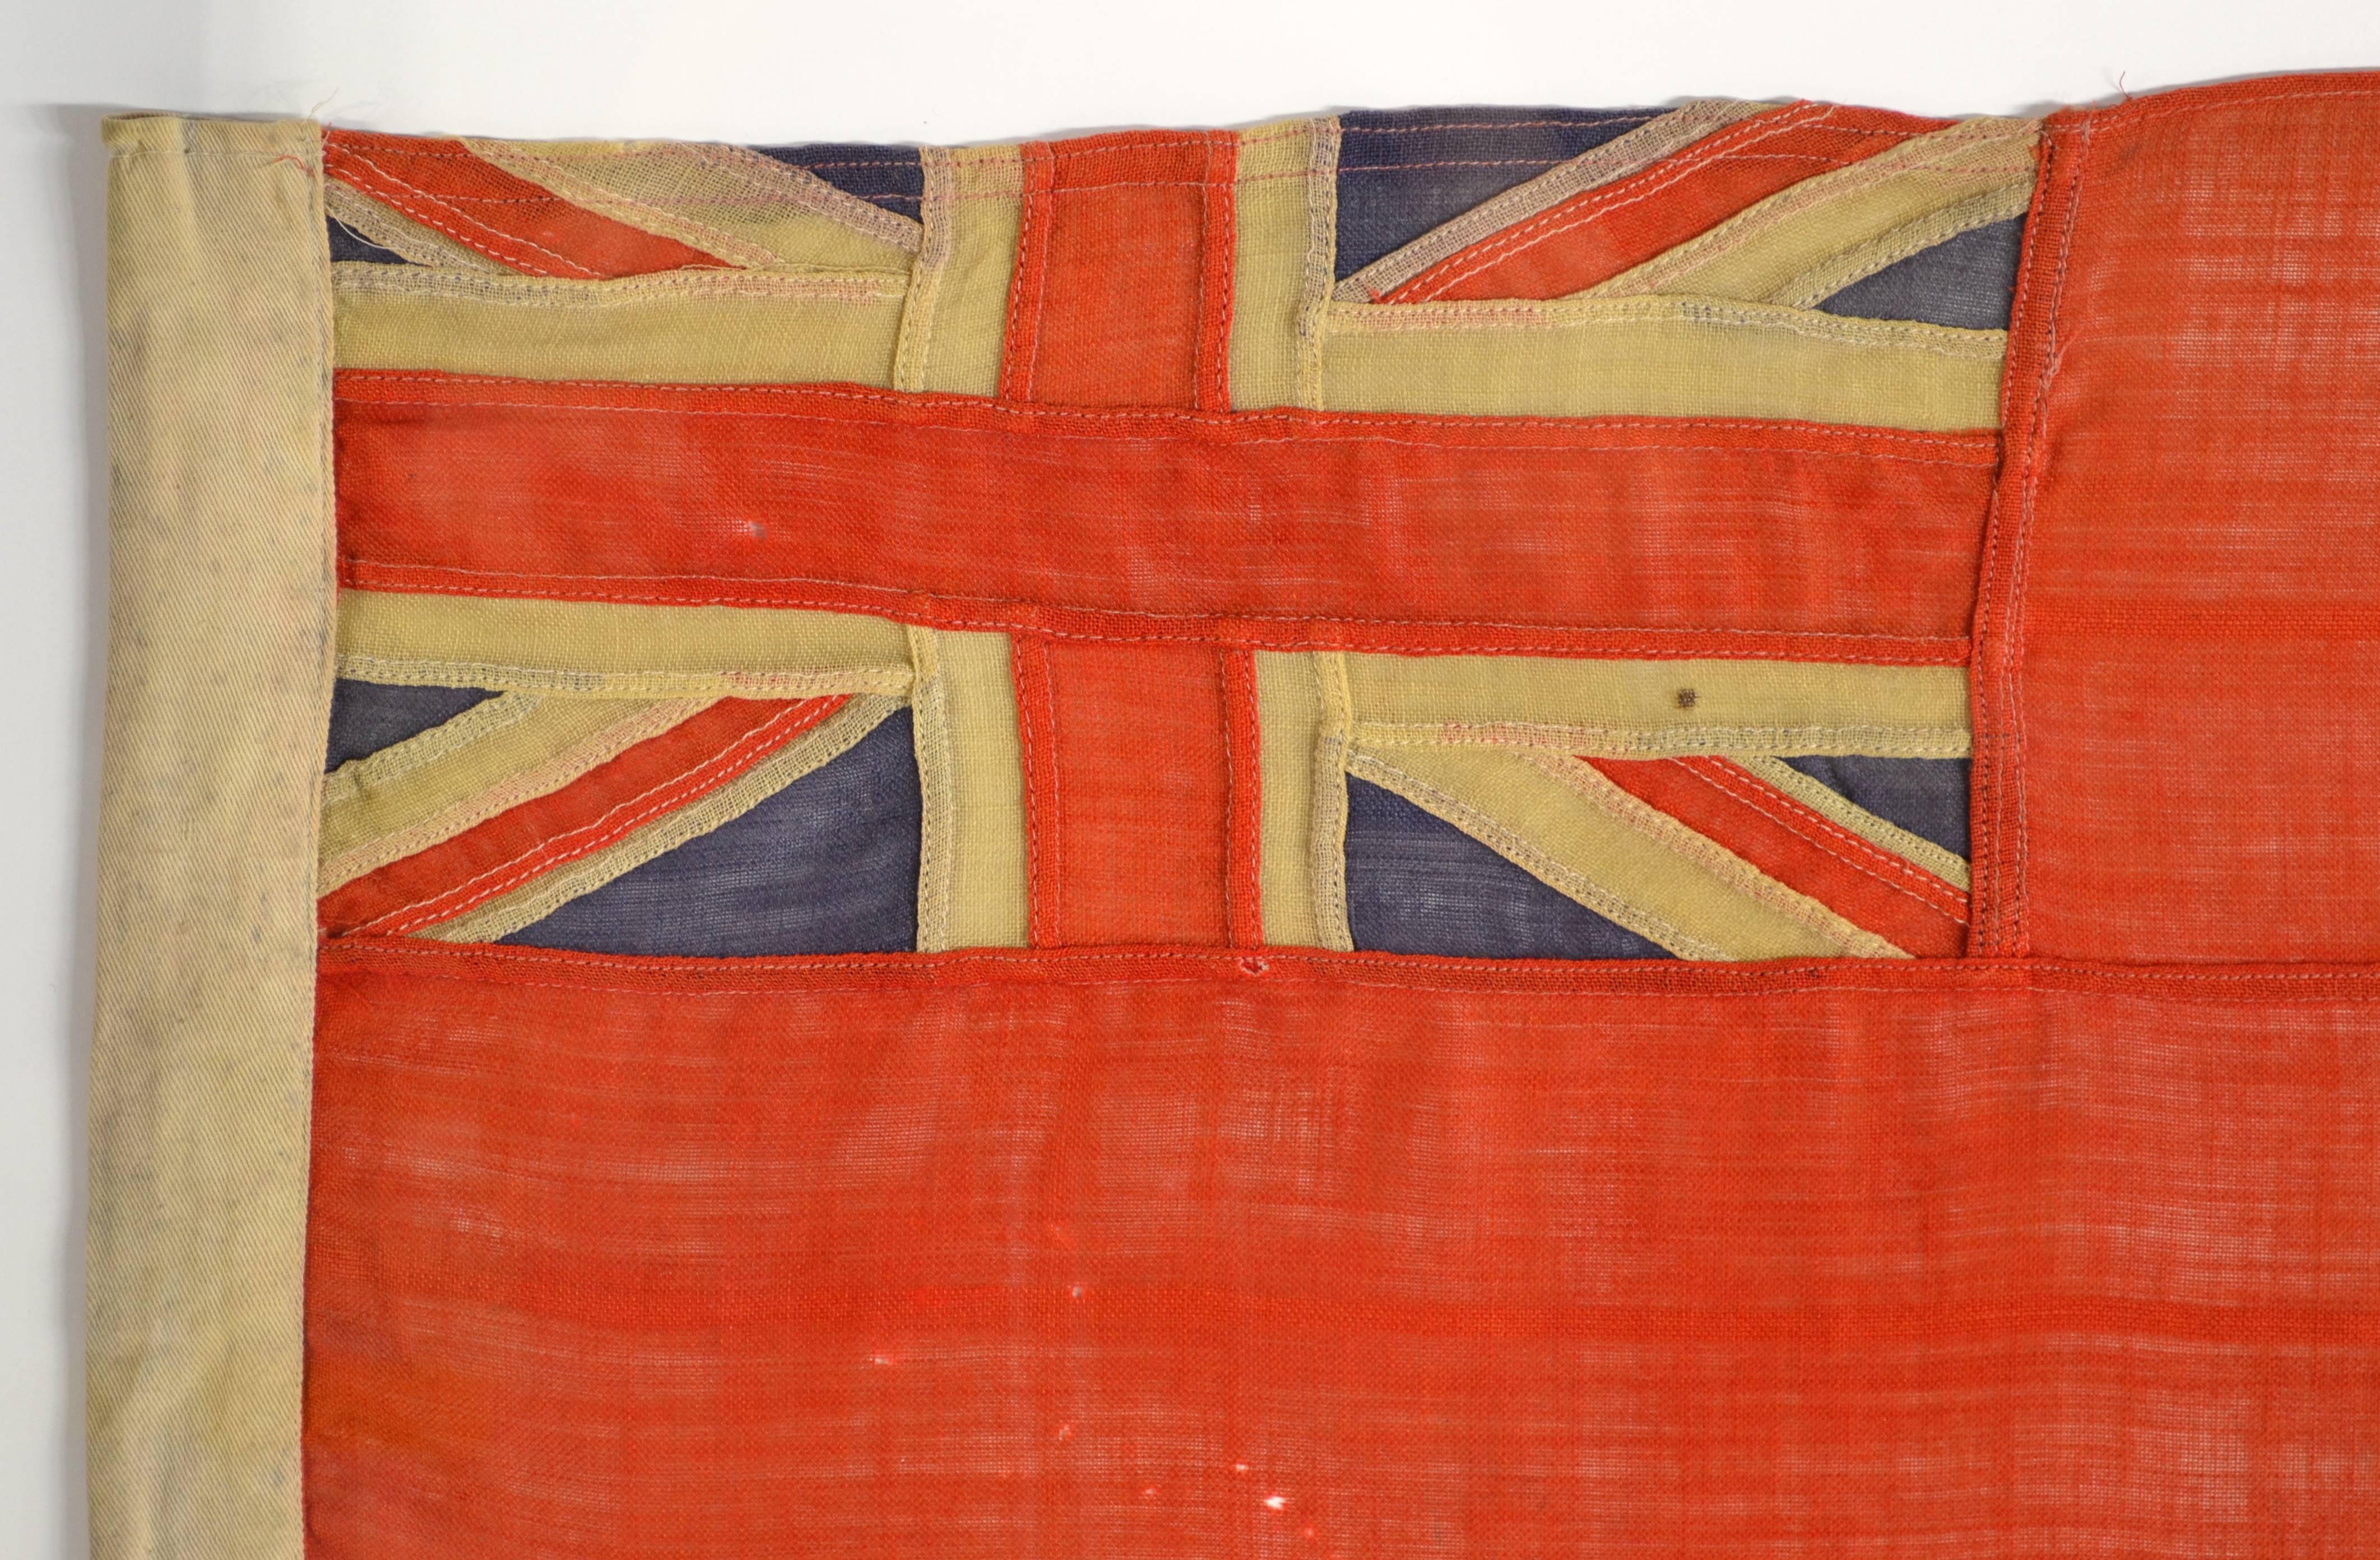 British Red Ensign.

Authentic rare antique hand-sewn British Red Ensign. Individual hand-cut and hand-sewn individual sections and panels. Made of wool. Nice rare flag.
The Red Ensign (red field with the Union Flag in the canton) defaced by a badge